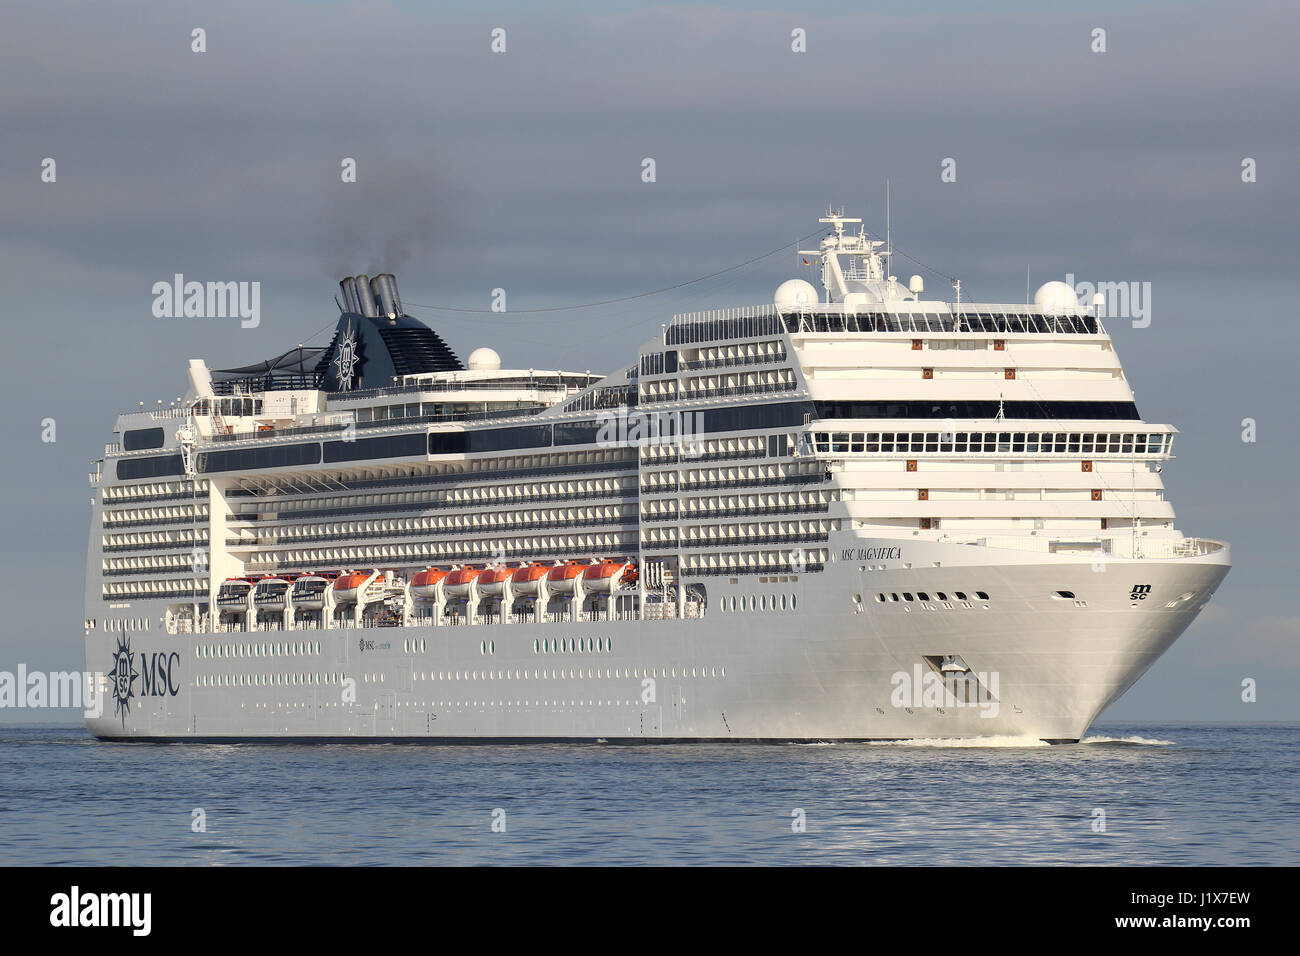 MSC Magnifica on the river Elbe. MSC Magnifica is a Musica class cruise ship operated by MSC Cruises. Stock Photo